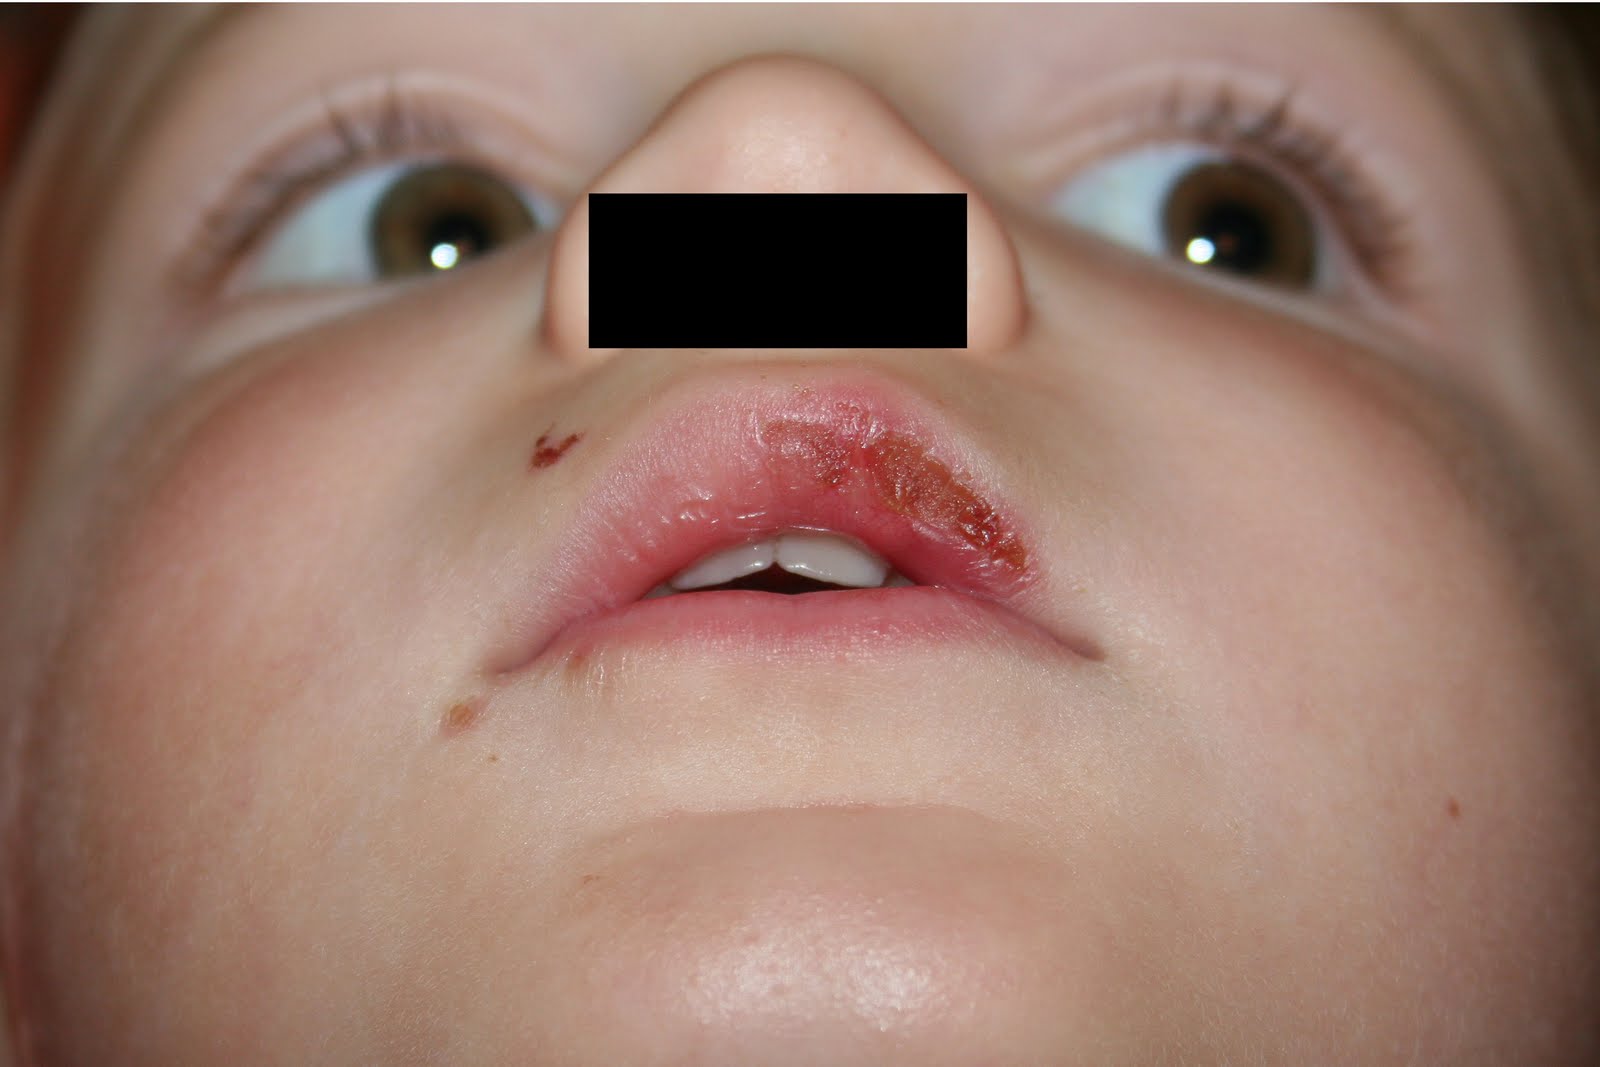 Scabs on lips turning black - Doctor answers on ...